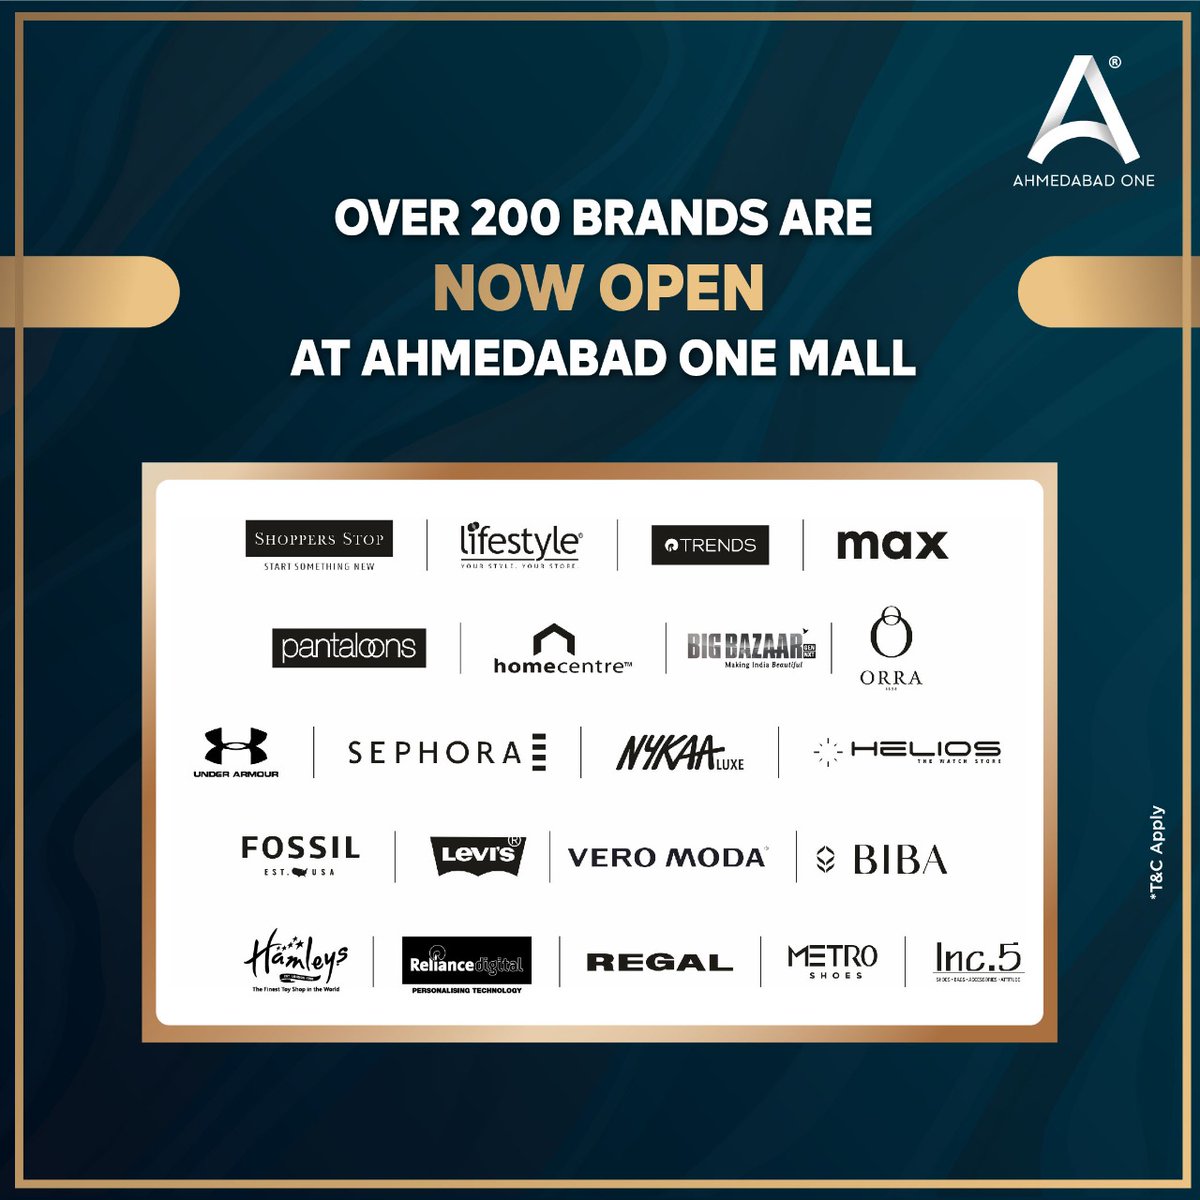 We now look forward to having you with us implementing all safety and health precautions in place. We've now opened more than 200 brands to help you meet experiences you've been missing for a long time. Welcome back to #AhmedabadOne. #IndianMalls #NexusMalls